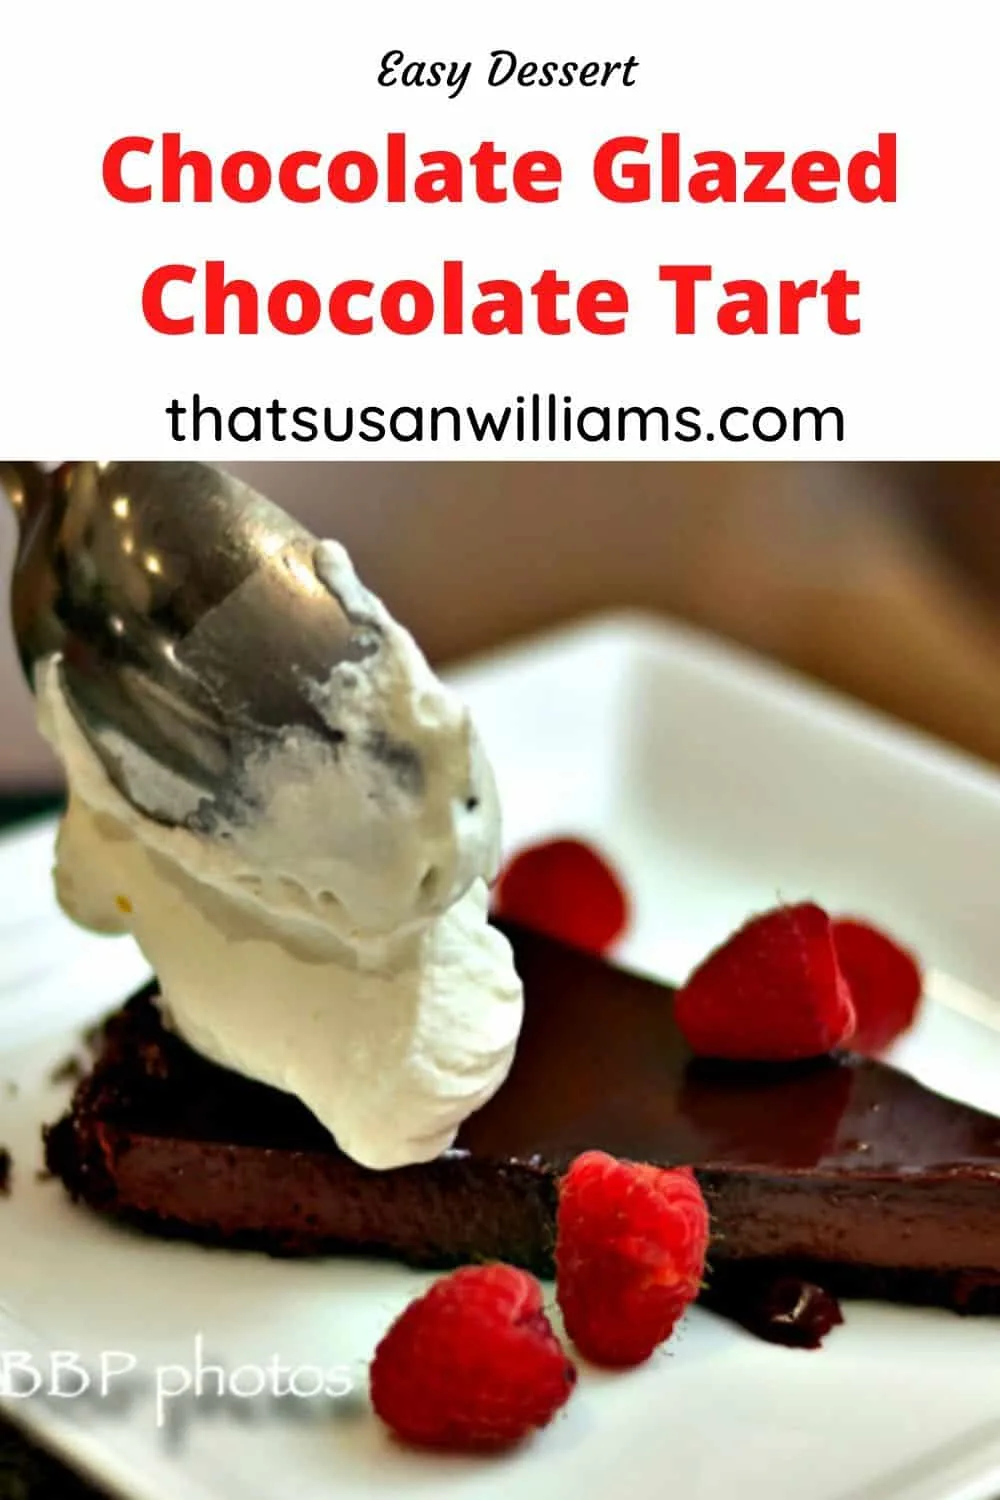 Easy and Delicious Chocolate Glazed Chocolate Tart